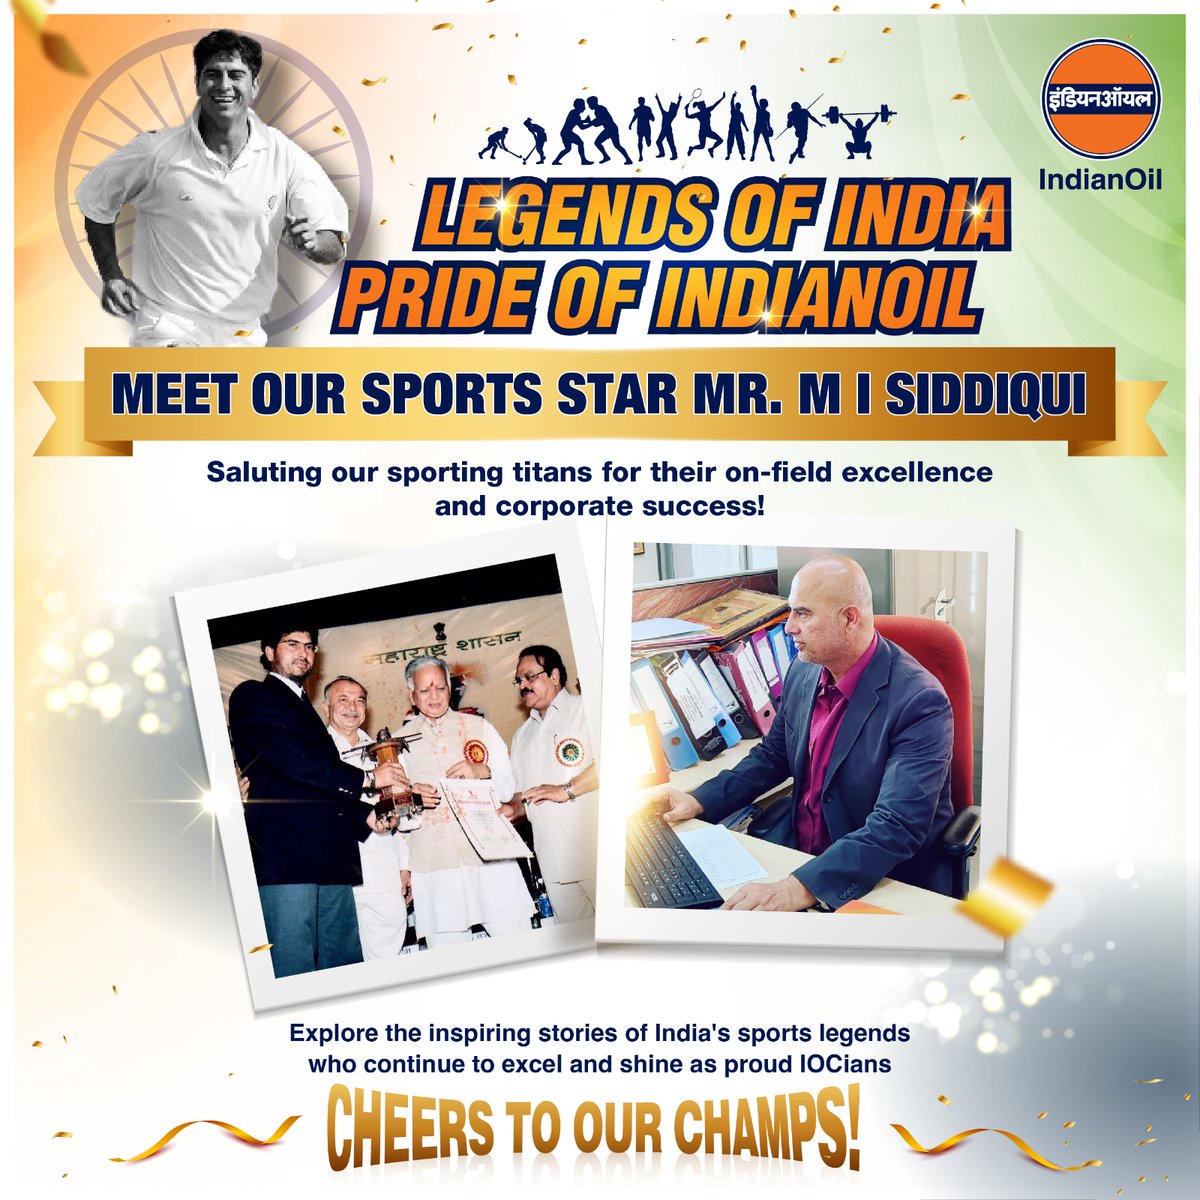 #TuesdayTryst rings in the story of Mohamed Iqbal Siddiqui's journey from cricket glory to corporate leader. IndianOil's unwavering support across his career helped Siddiqui prove that excellence has no boundaries! Read his story:  iocl.com/uploads/Mr_Moh…